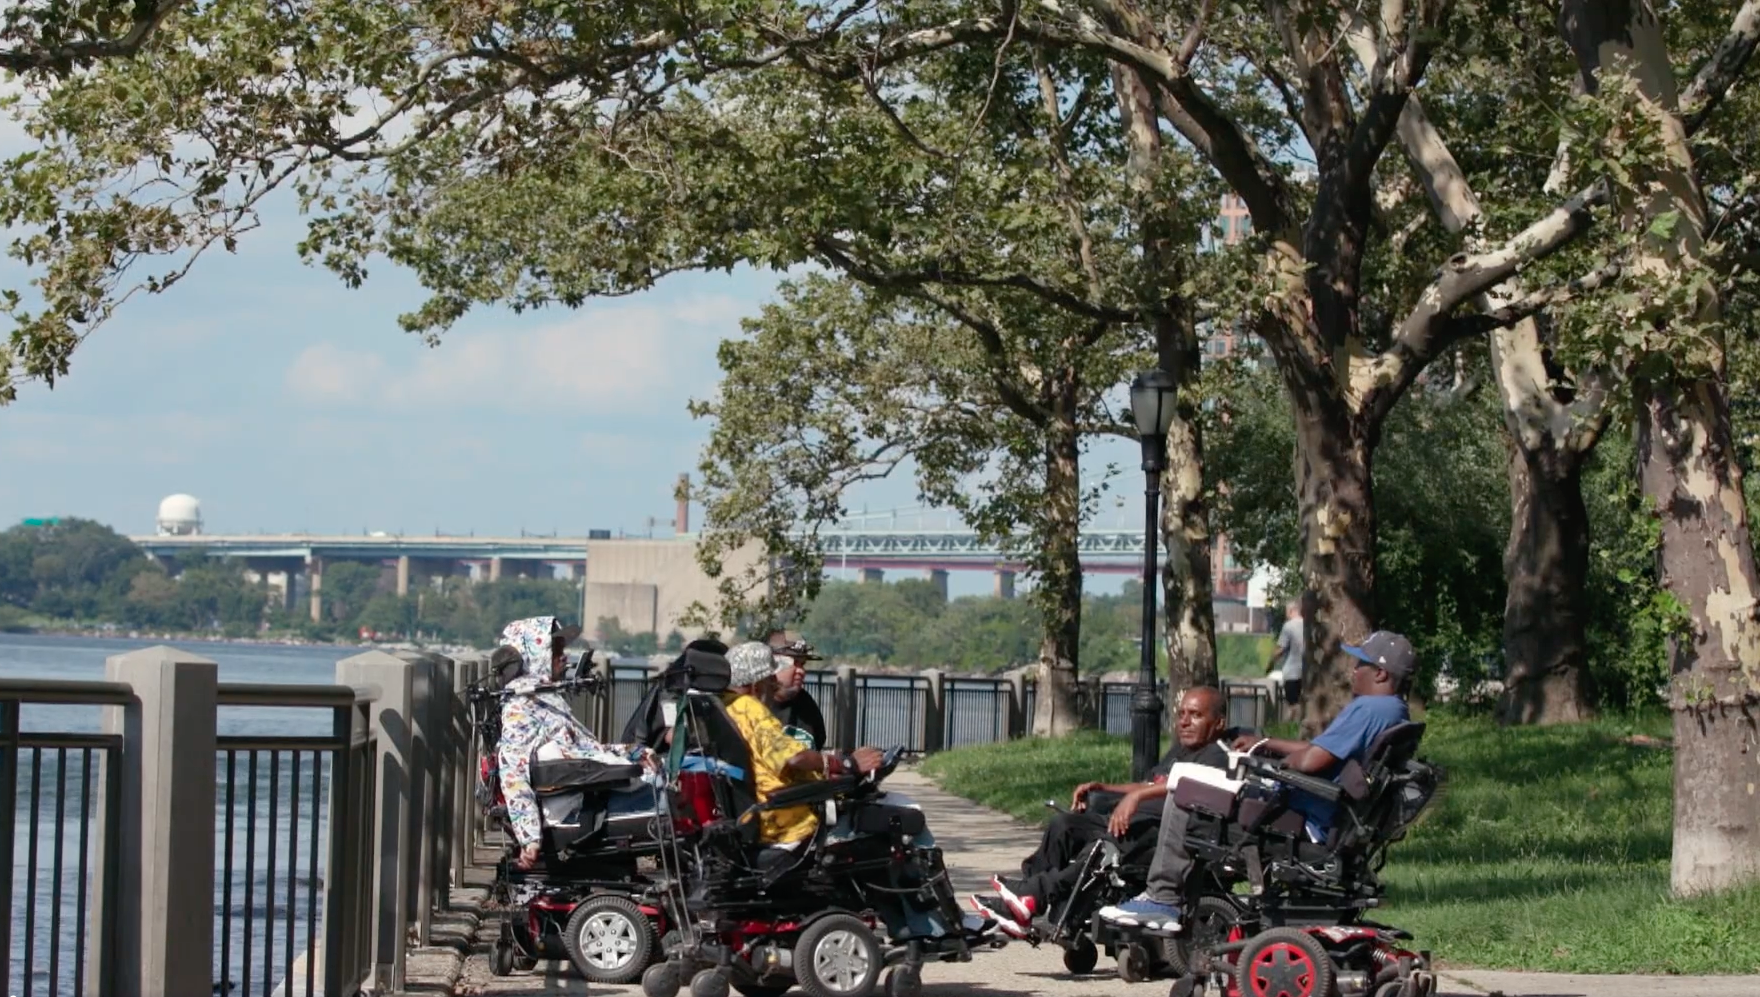 In a park next to a river, six men in powered wheelchairs form a circle.